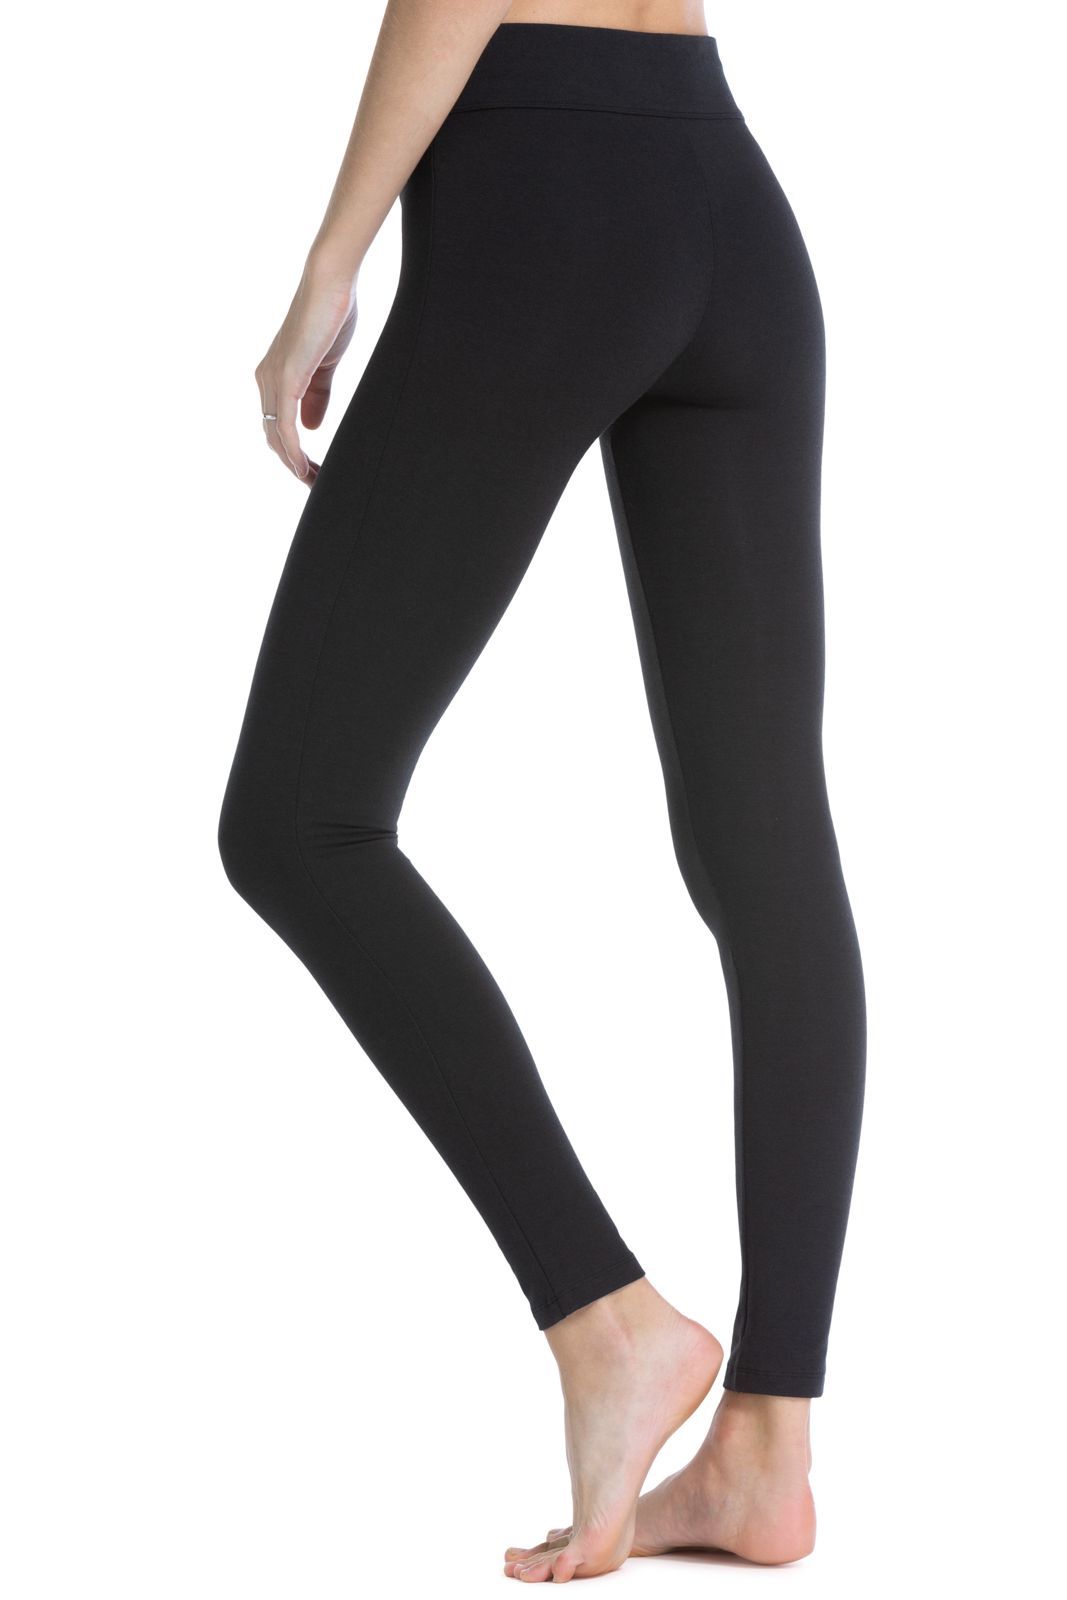 Under Armour Meridian Ankle Women's Leggings | Great Lakes Outpost